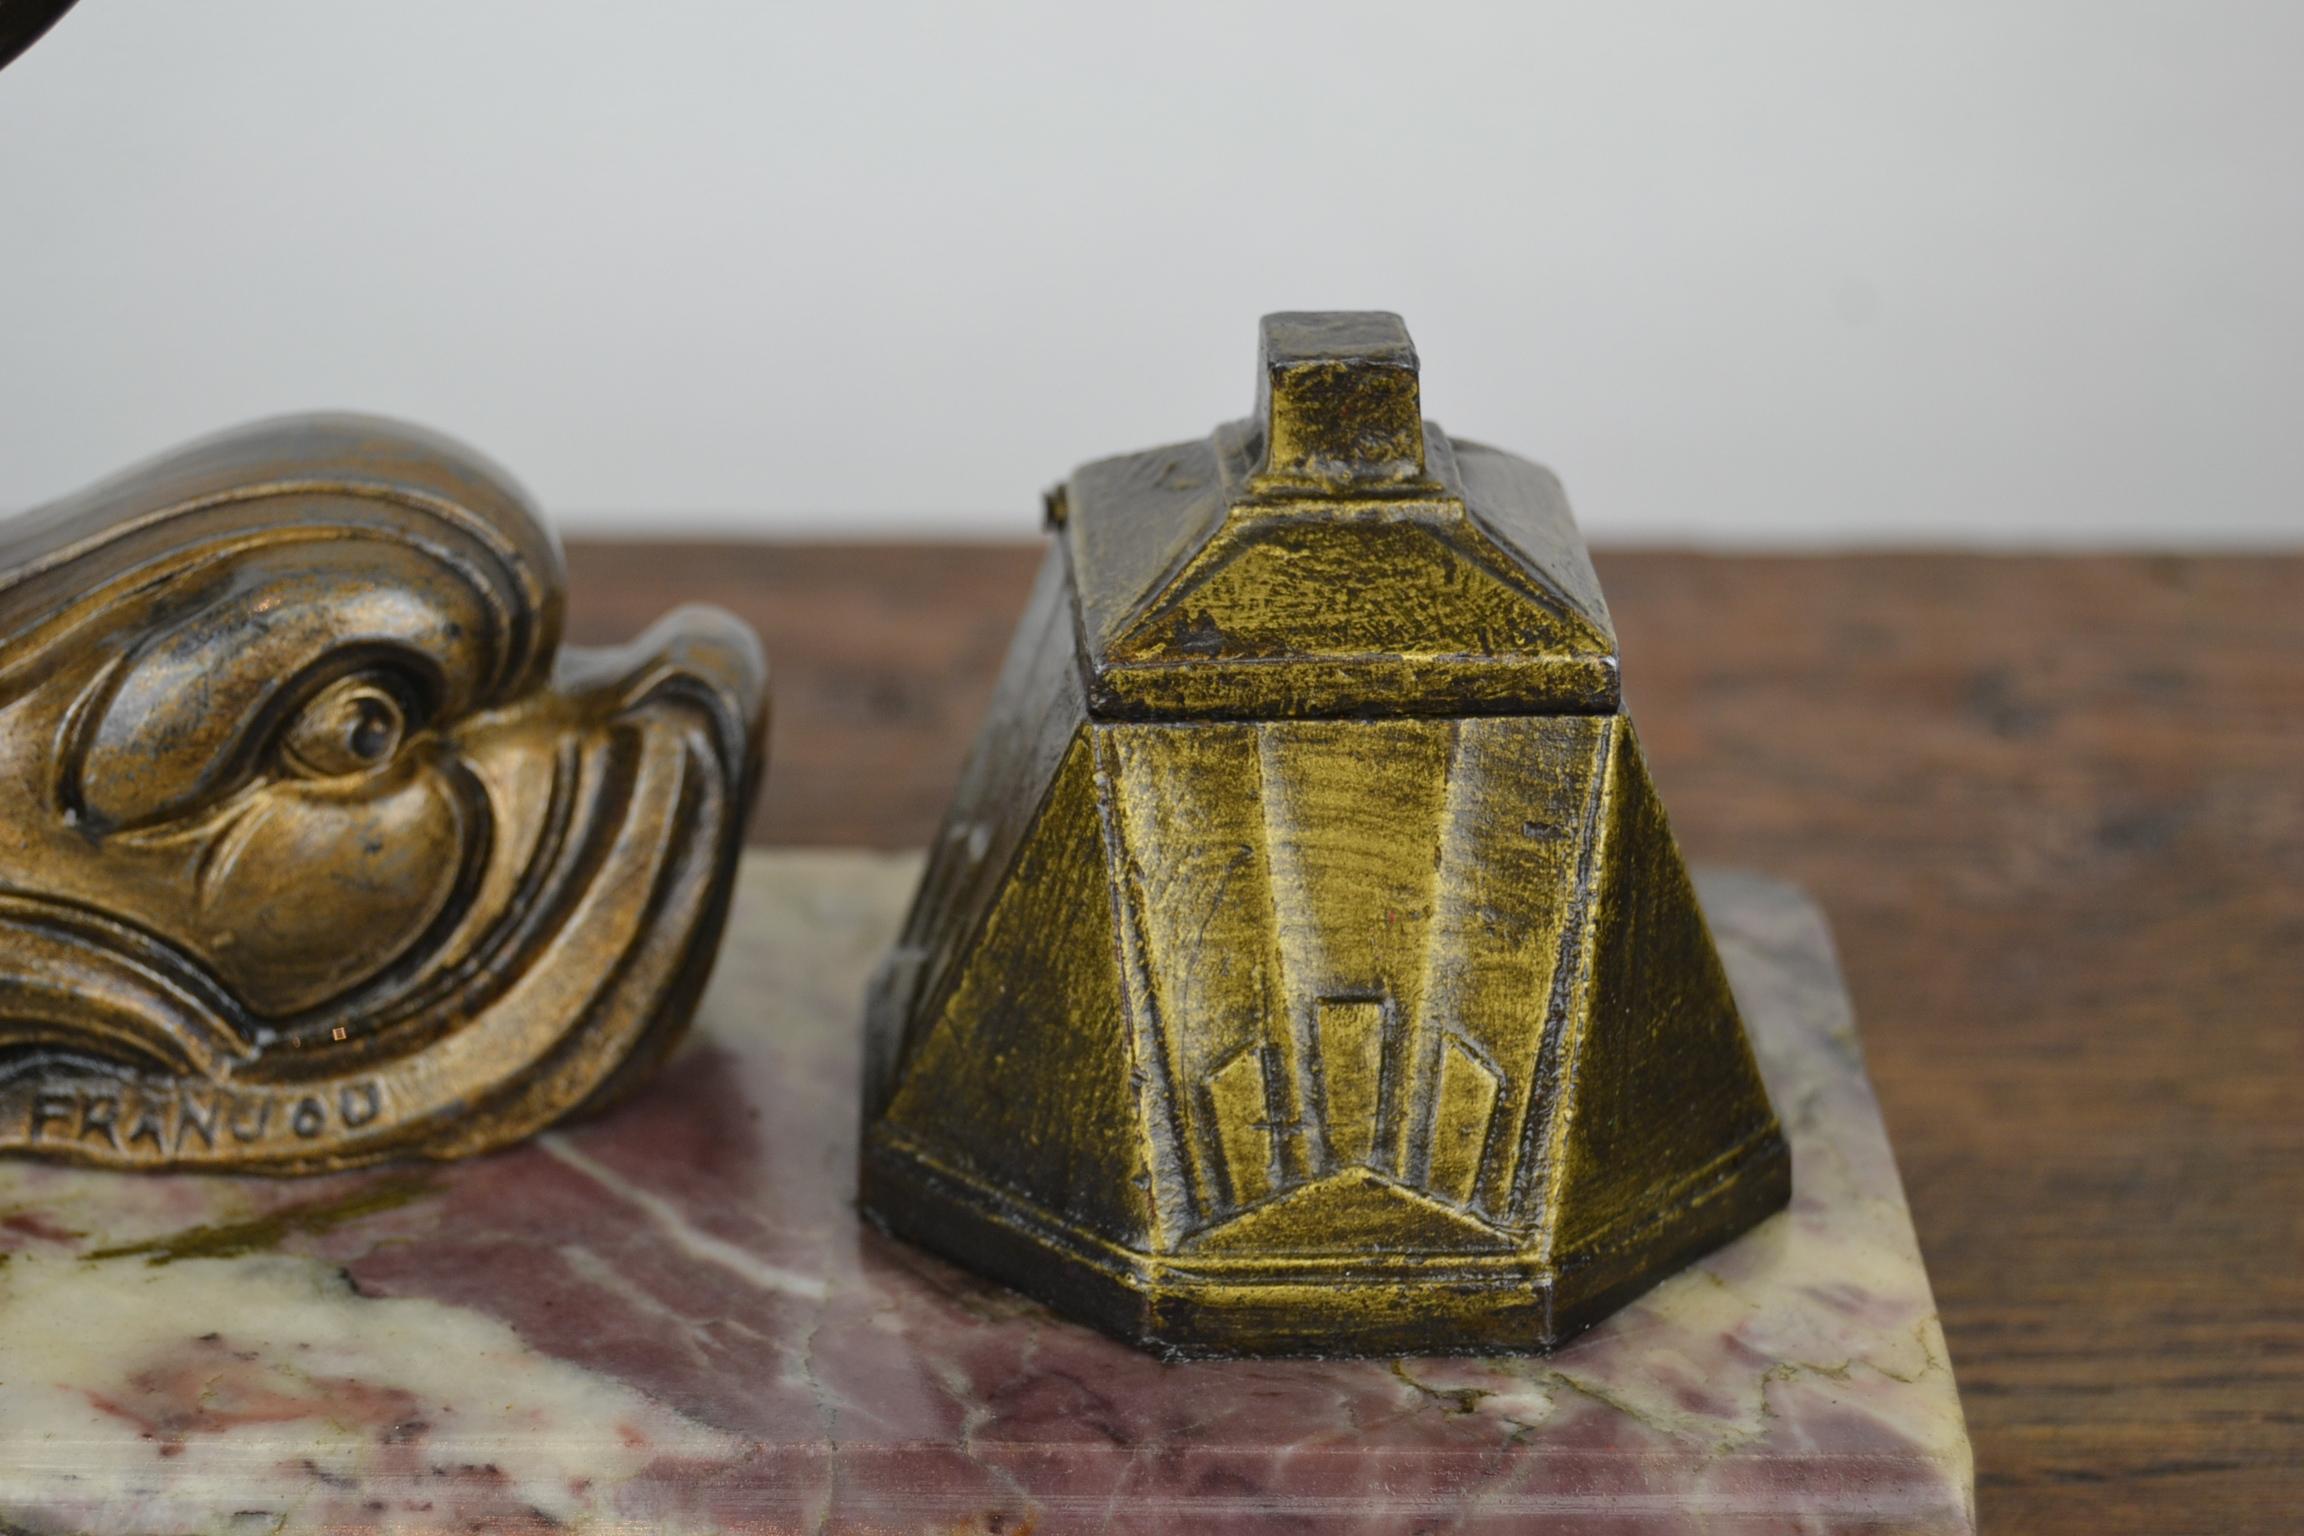 20th Century Art Deco Inkwell with Fish by Franjou, France